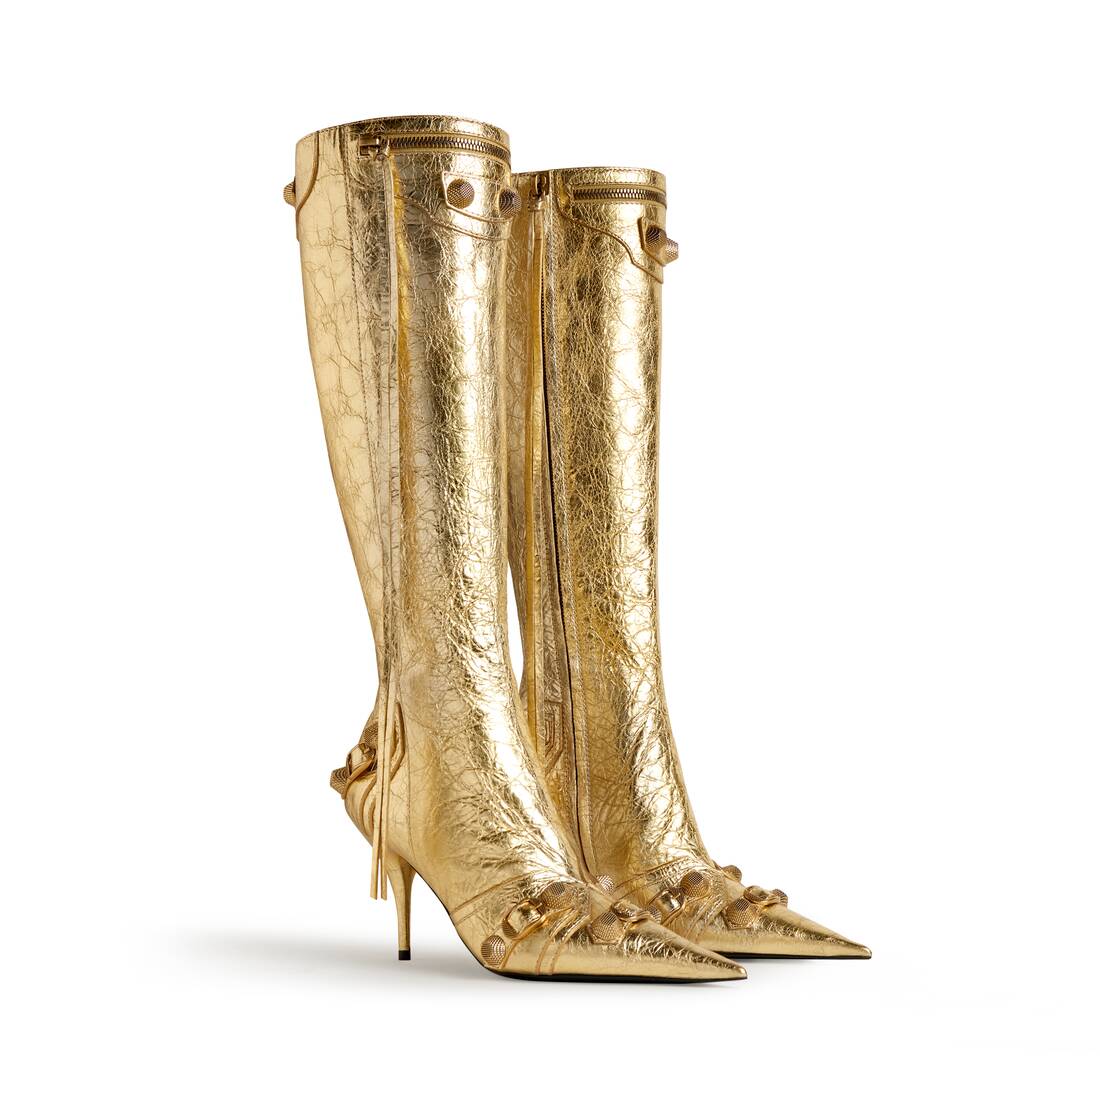 CHANEL Women's Boots Leather in Gold Size: EU 39,5